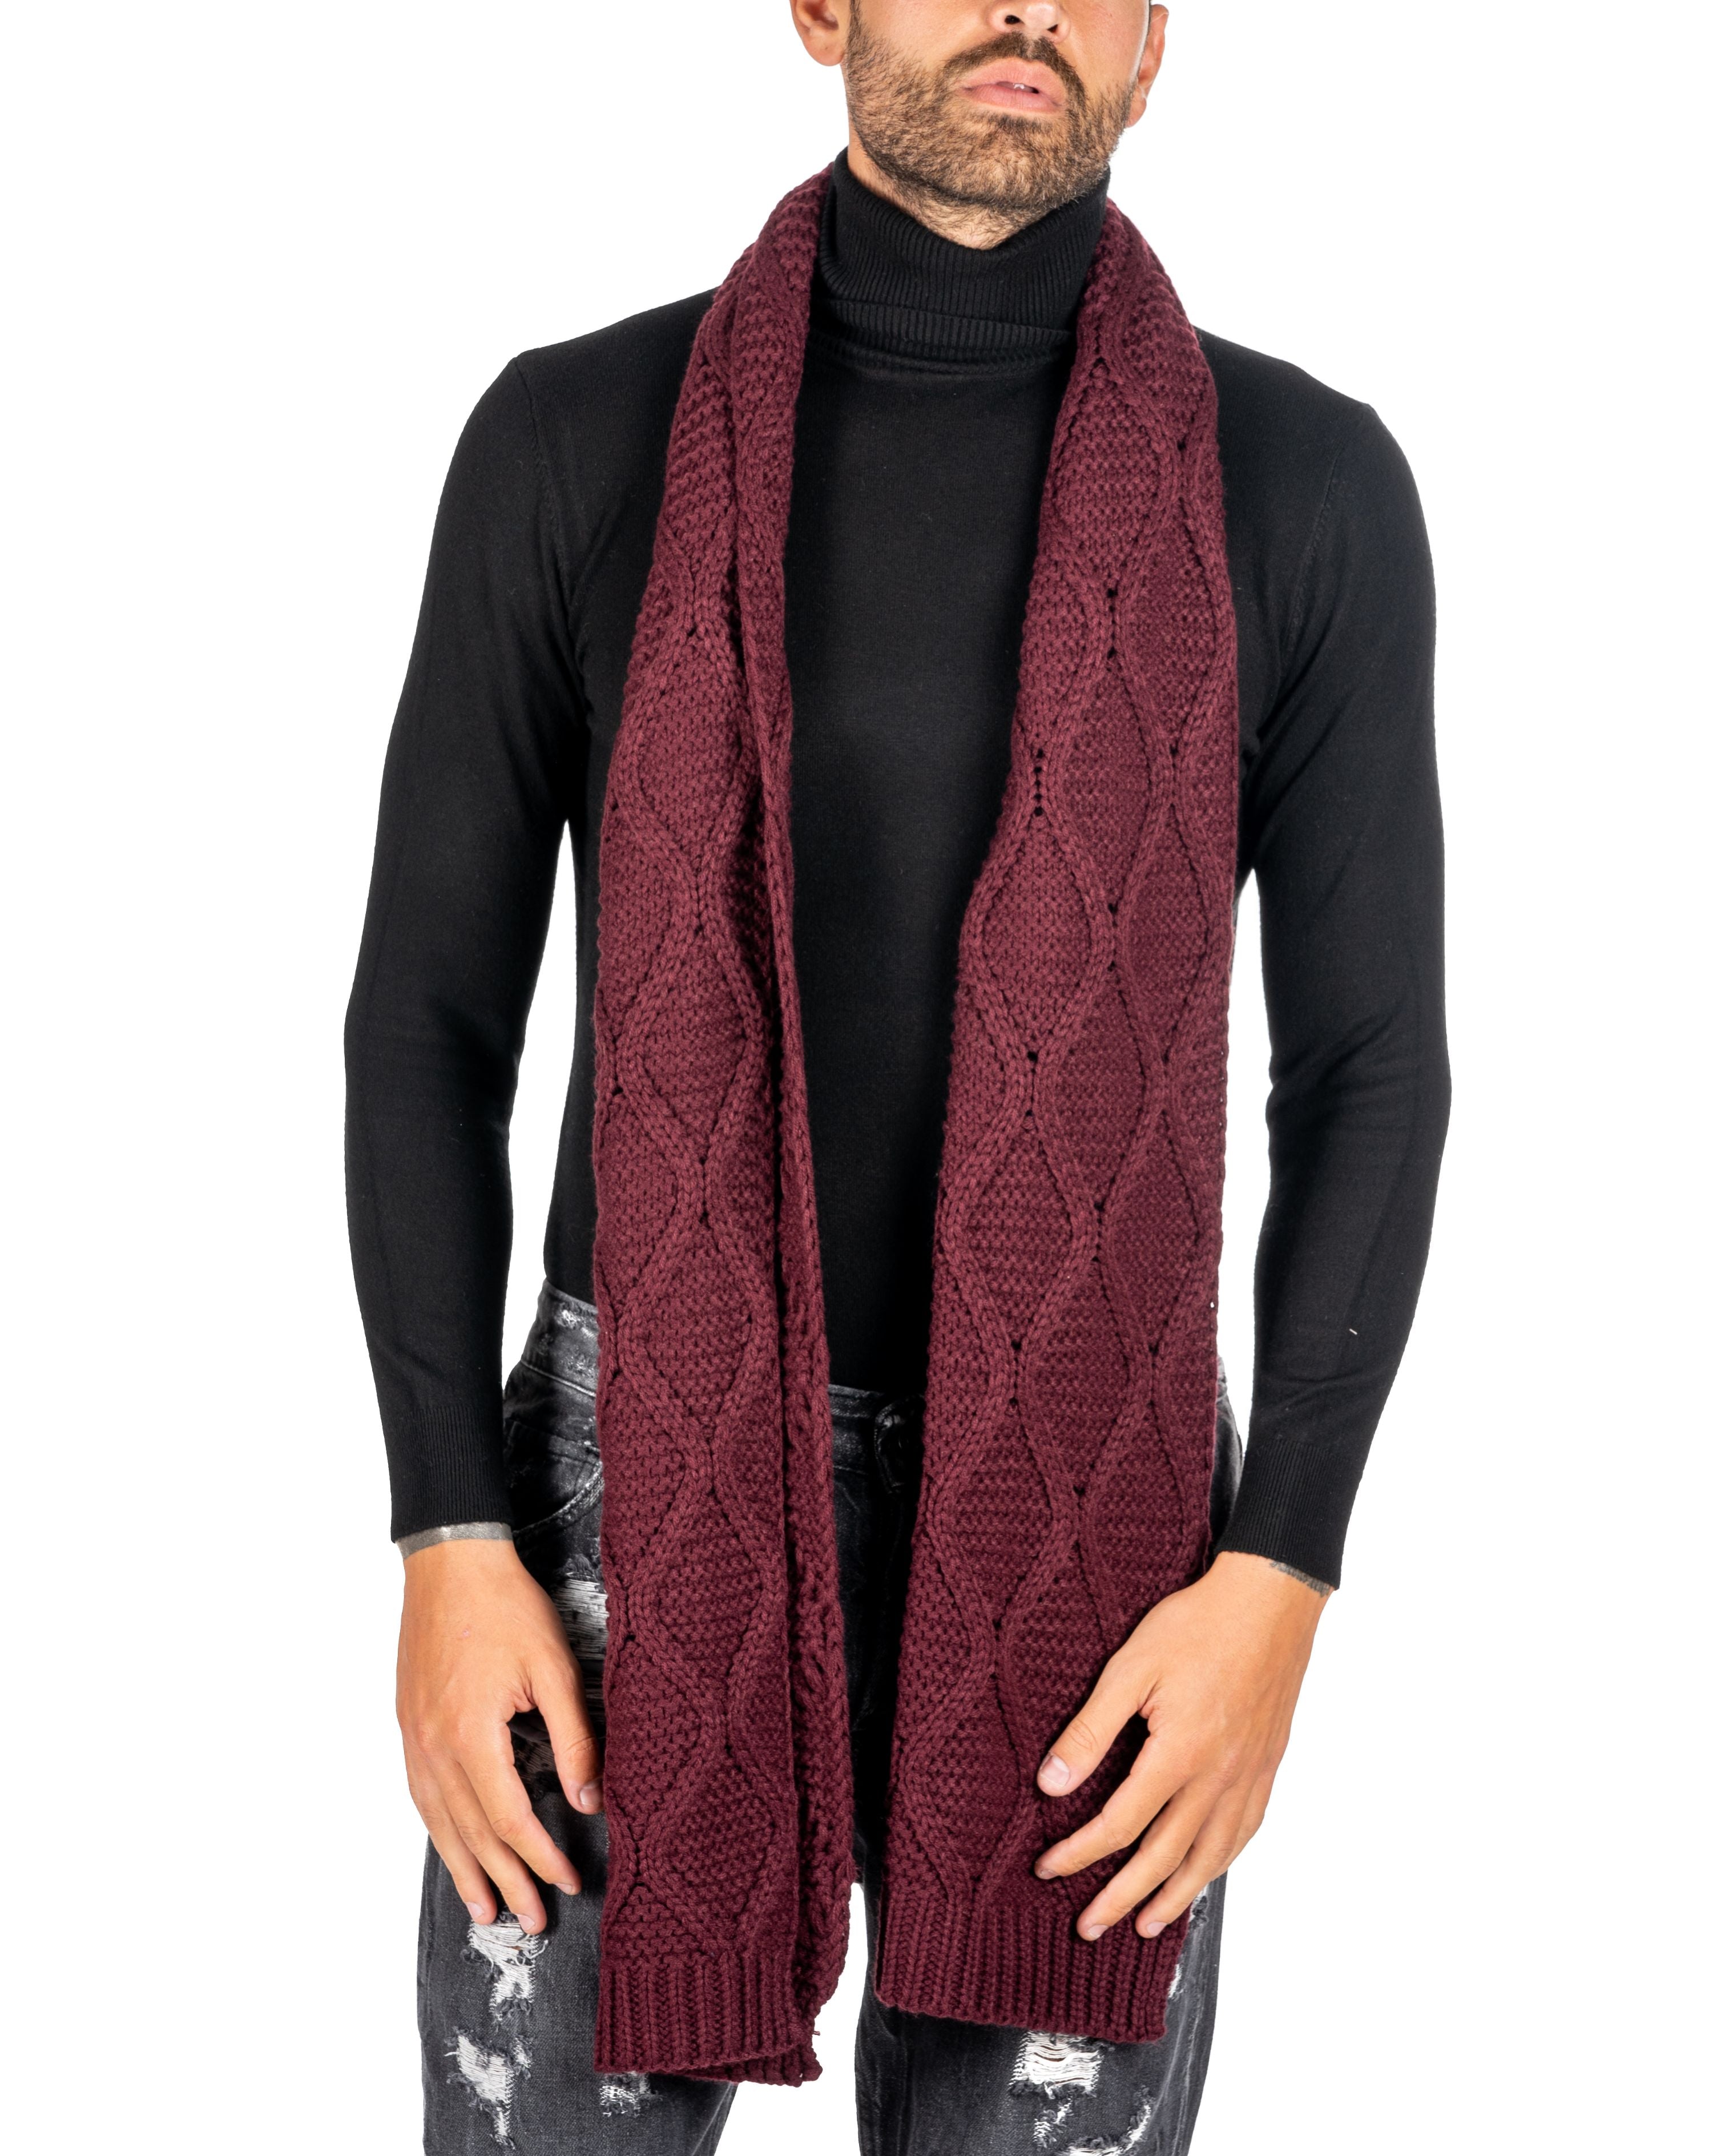 HEAVY SCARF BORDEAUX WITH BRAIDS PATTERN